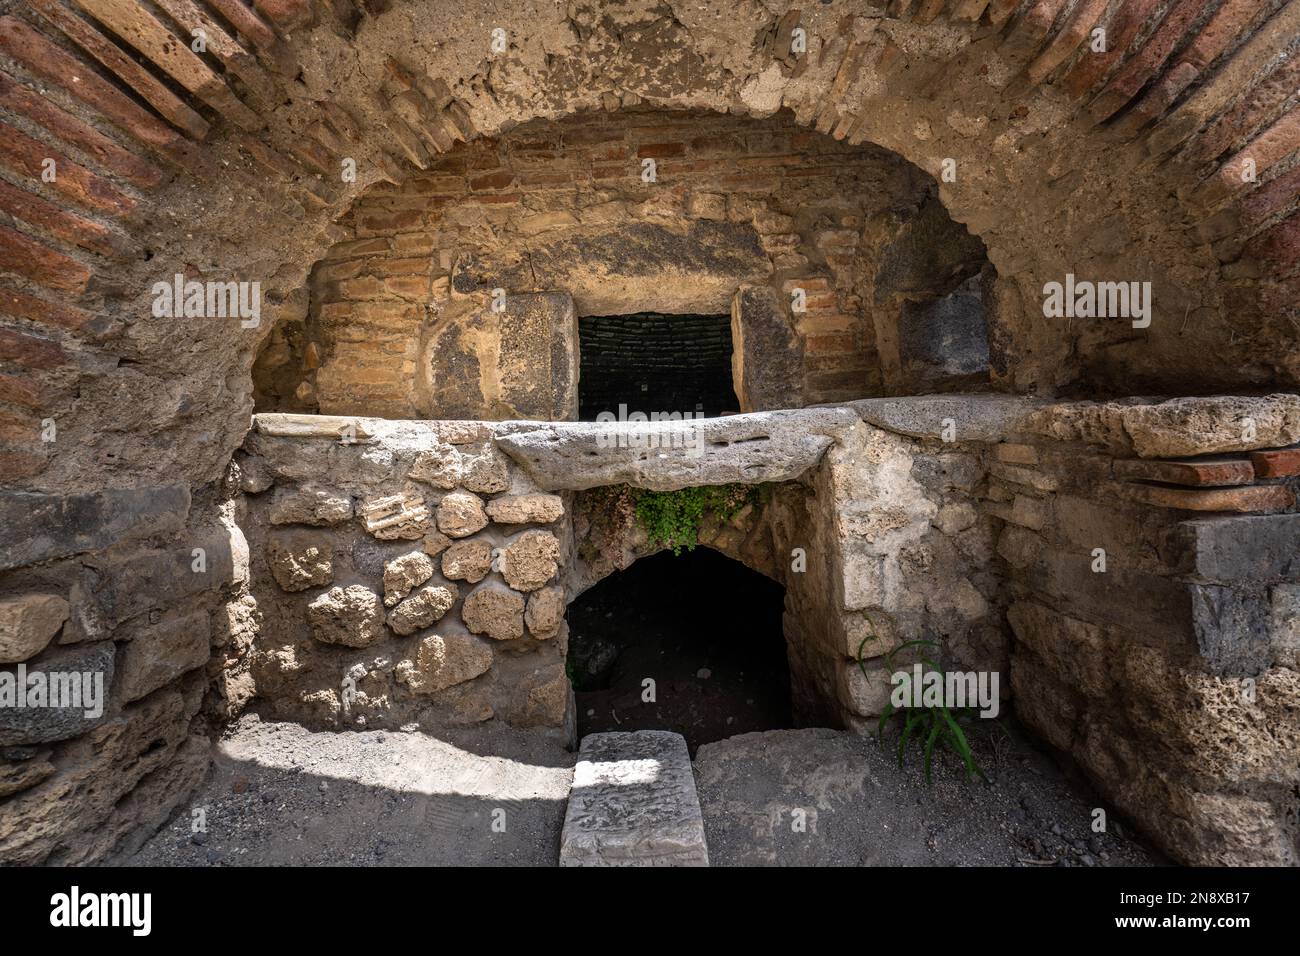 Interior of ancient Roman home in the ruins of Pompeii Stock Photo